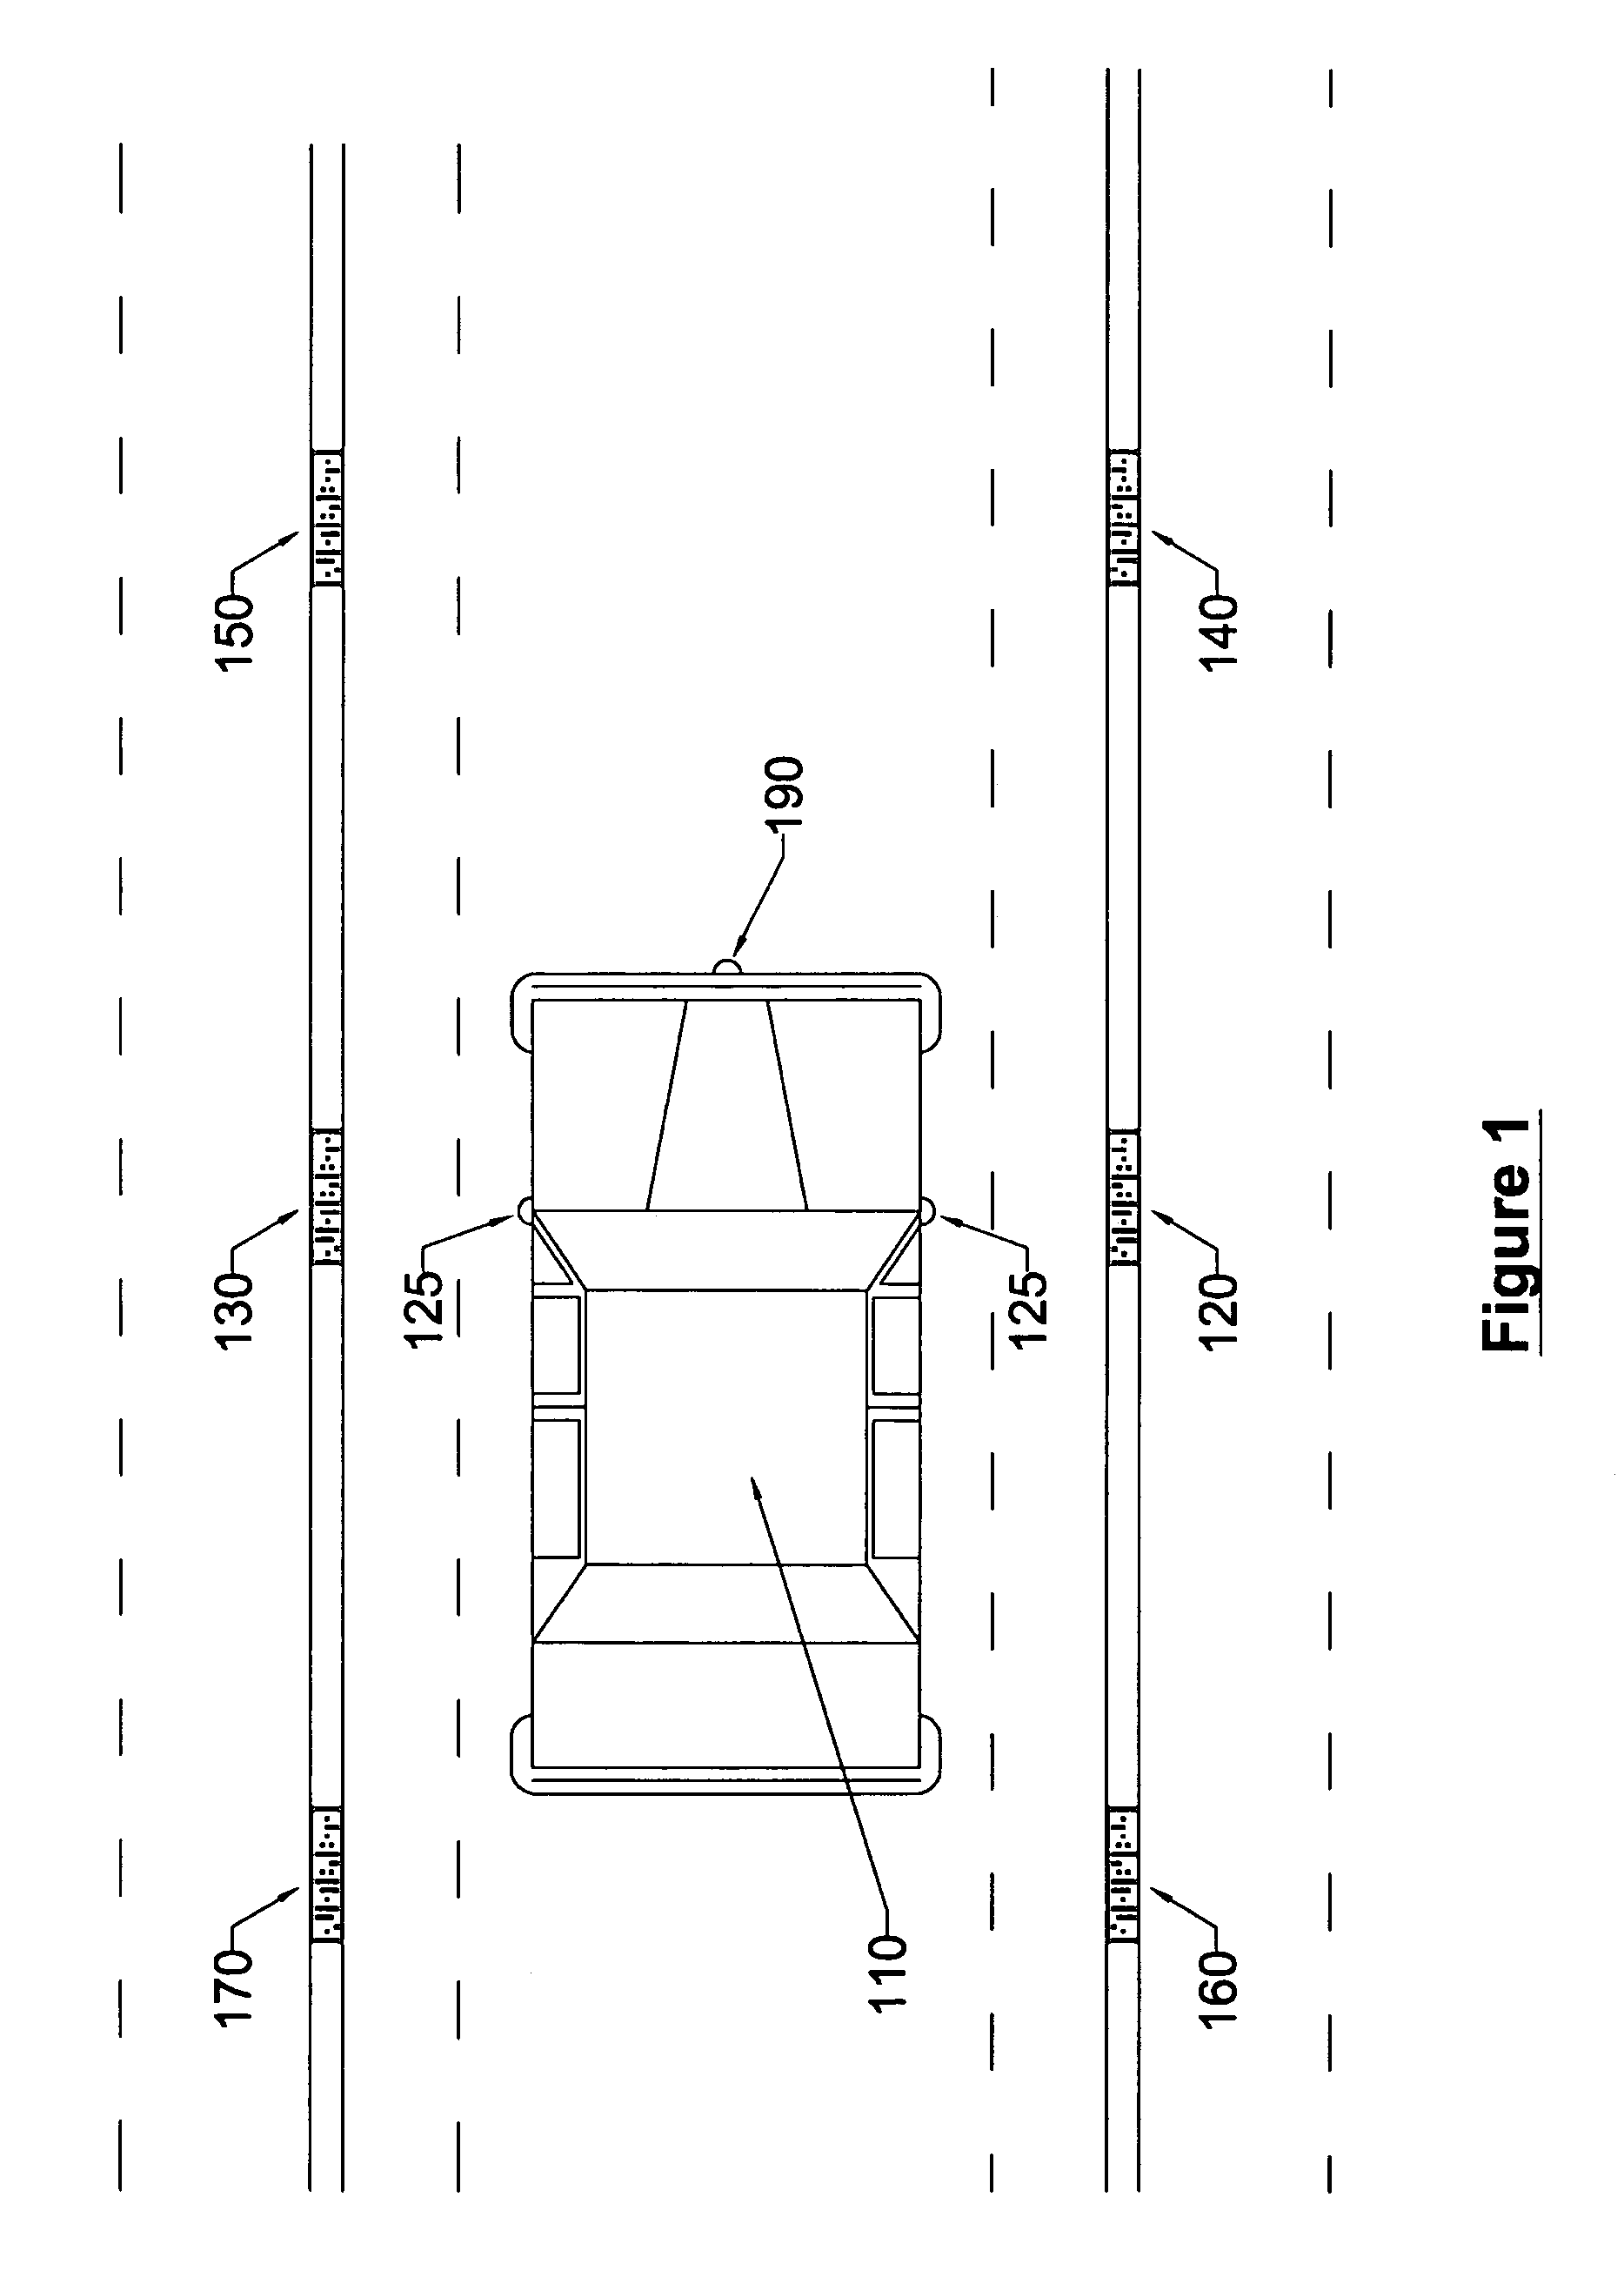 System and method for providing road information in advance